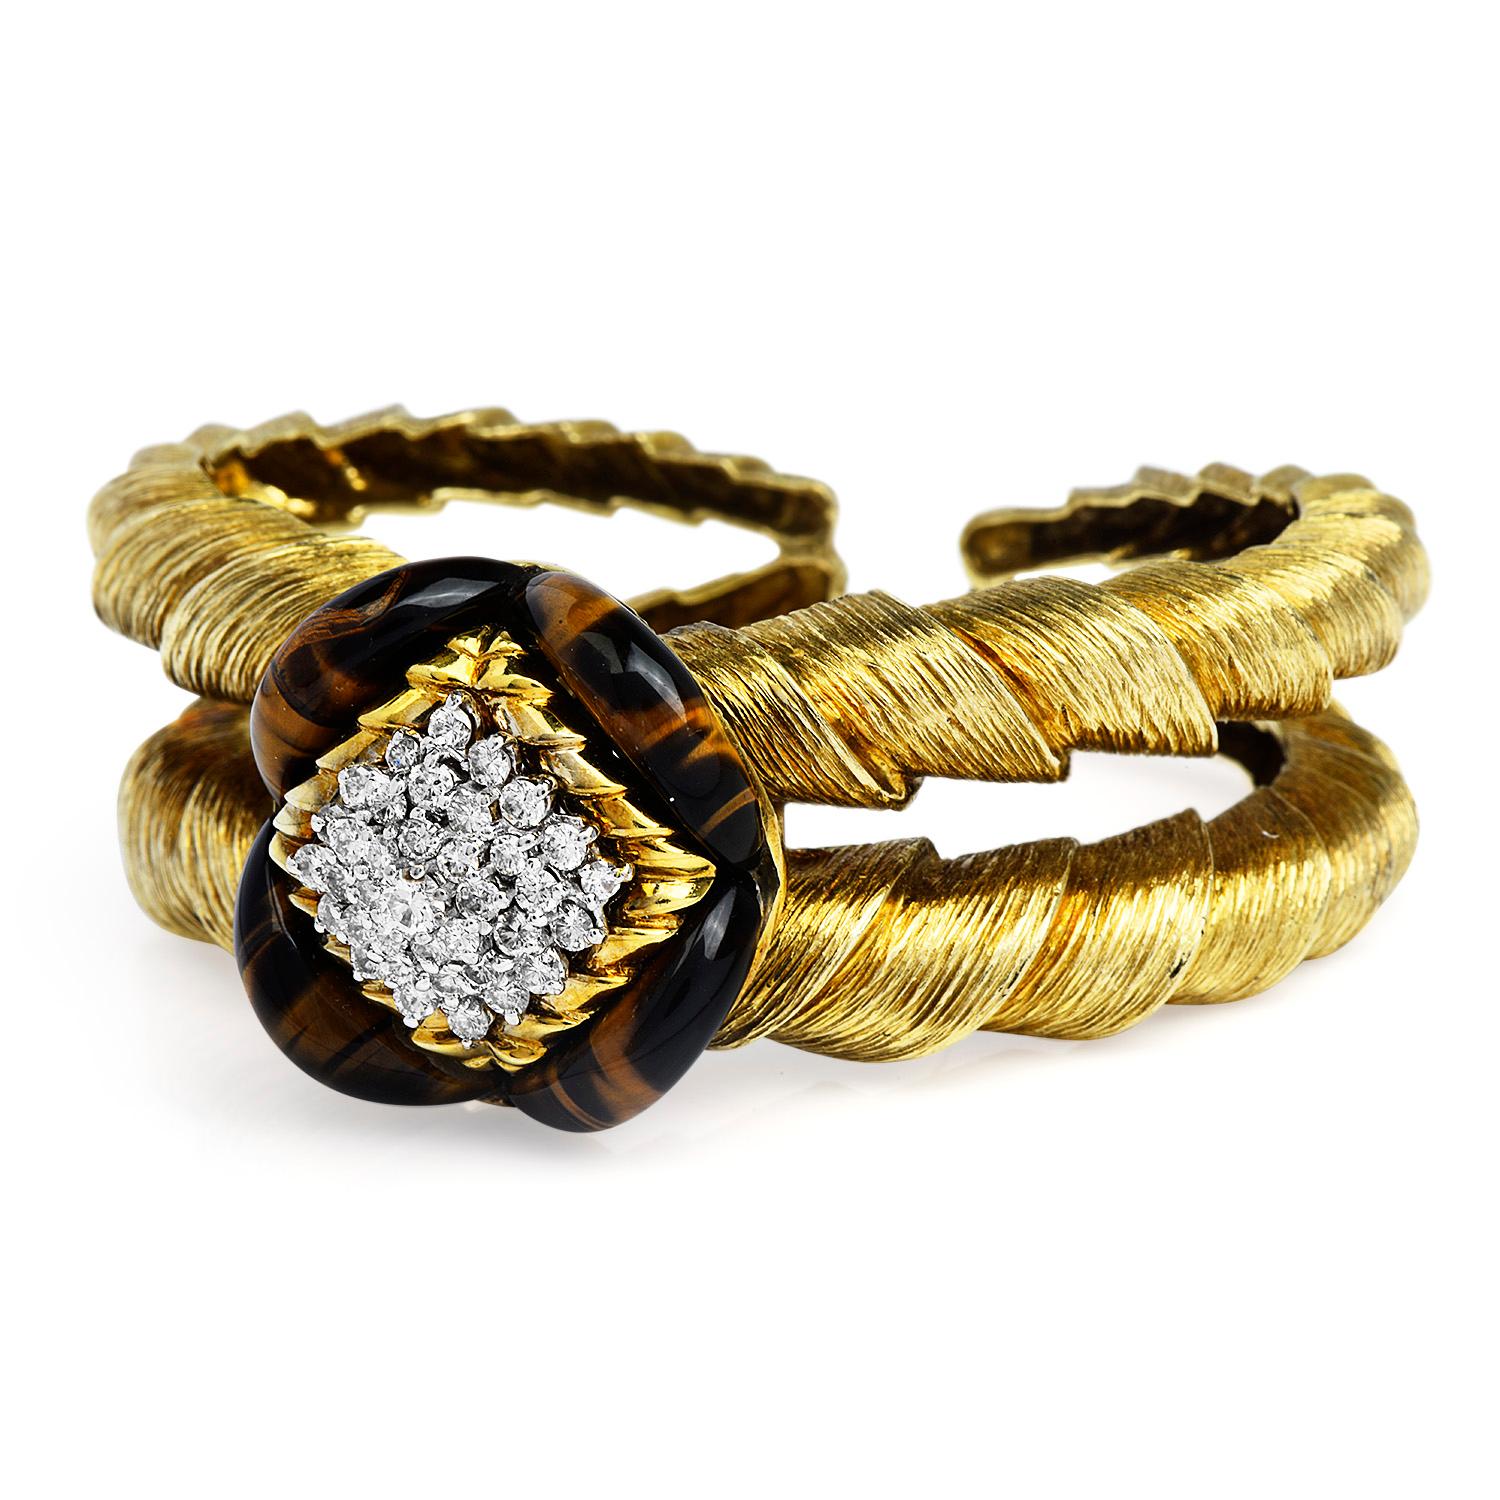 Higly Collectible La Triomphe Vintage Bracelet, 
This Circa 1970's piece is Centered by a flower design cluster of diamond & tiger eye gemstones, adorned with solid 14k gold cuff textured bracelet, inspired in ram horns,
This beautiful Cuff bracelet